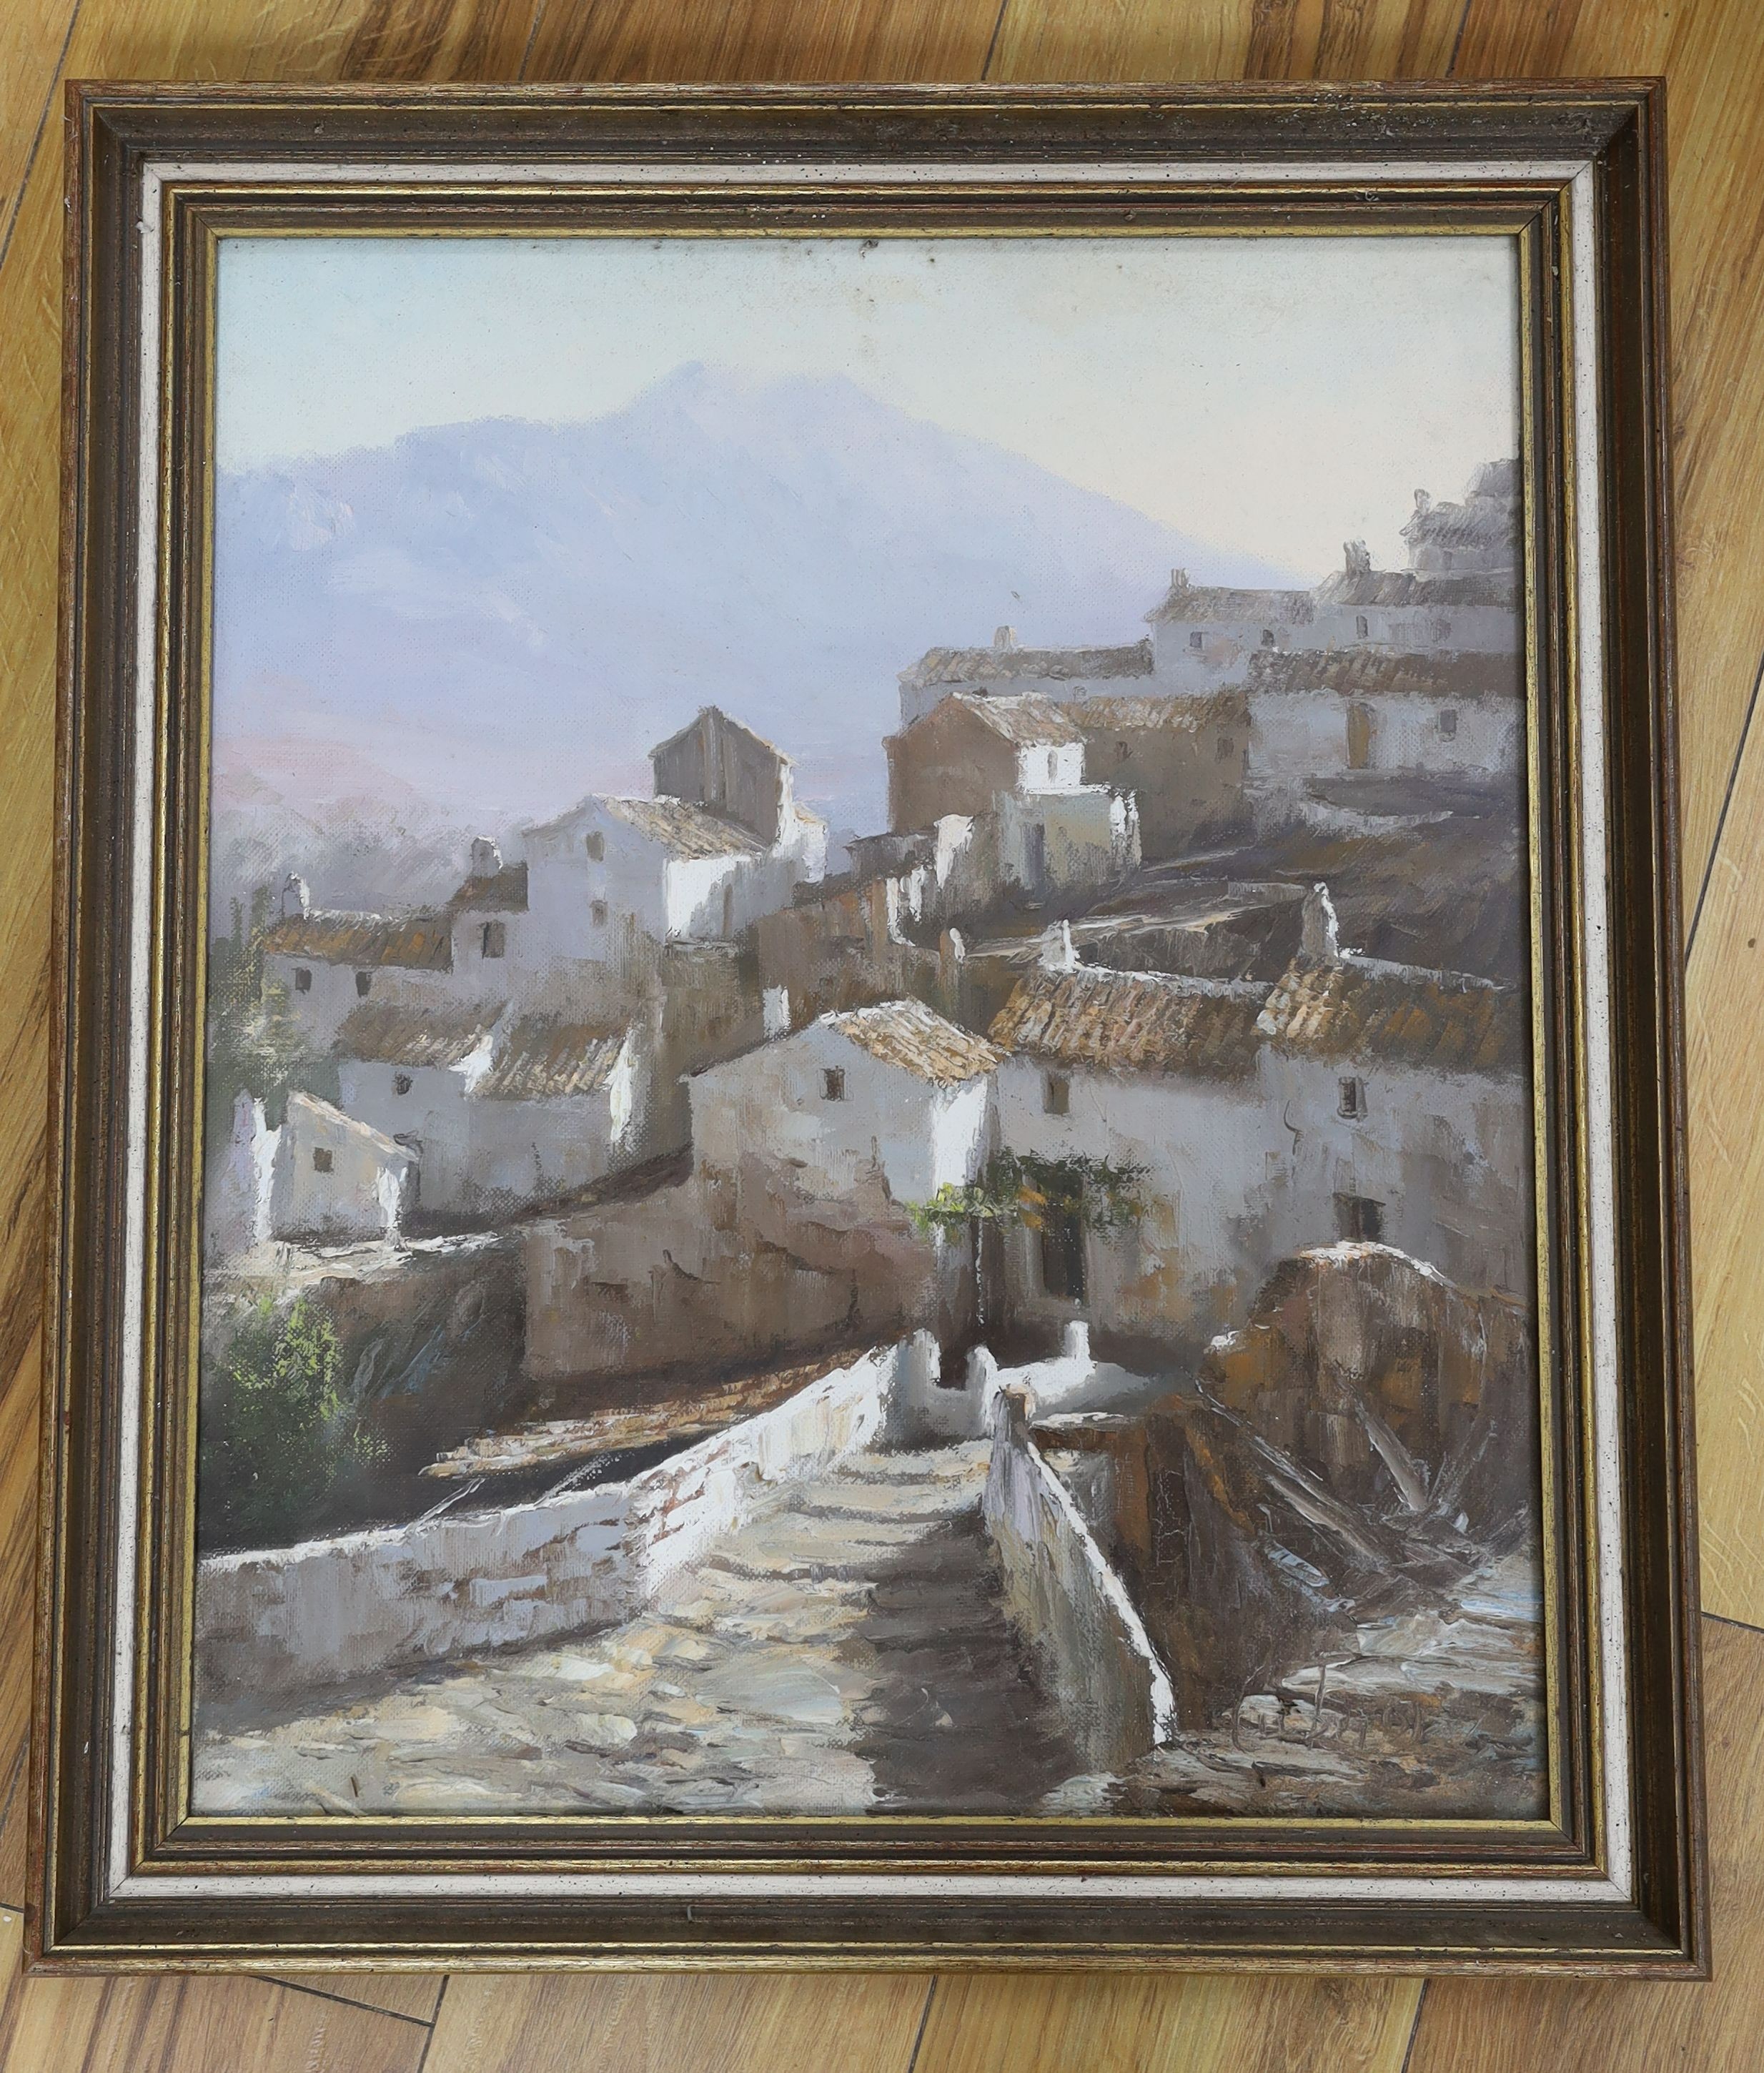 Manuel Cuberos (1933-), oil on canvas, View of a Spanish village, signed, 54 x 45cm - Image 2 of 4